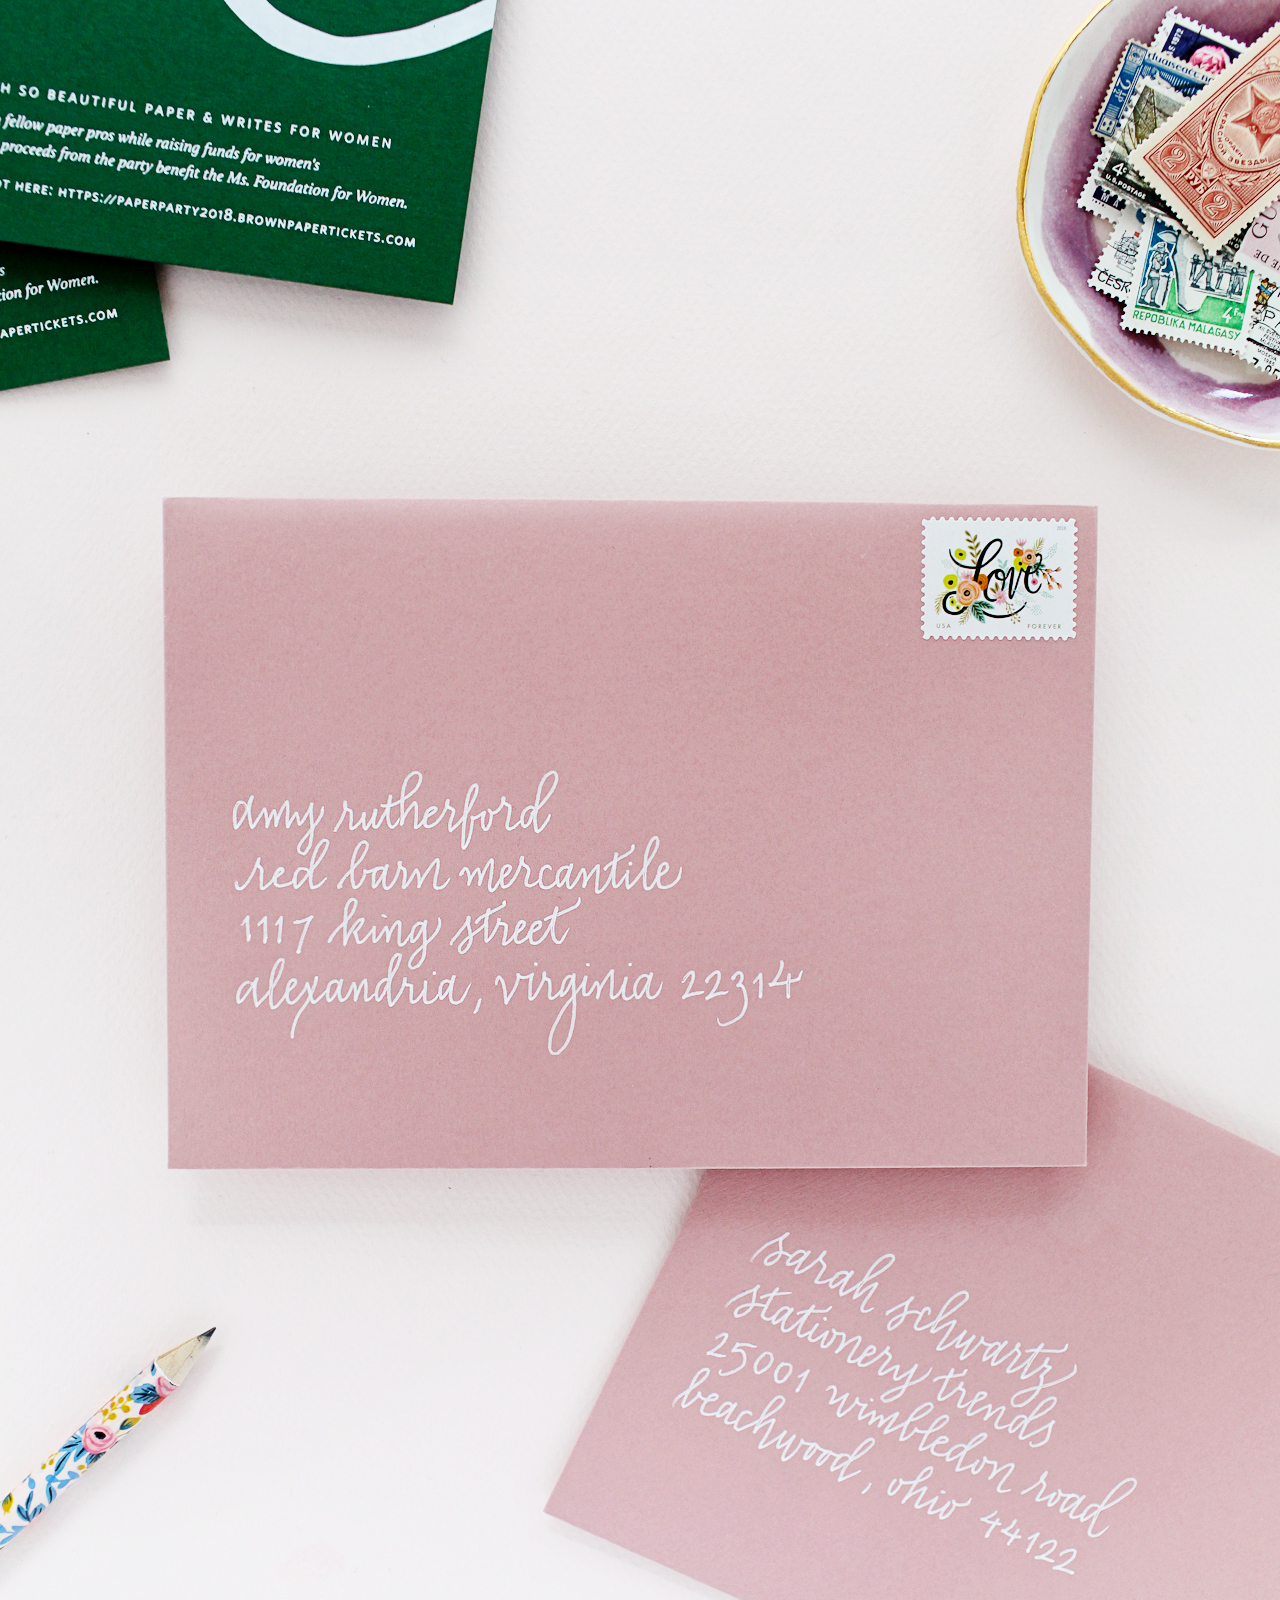 Modern Minimalist Invitation Inspiration with Abstract Shapes / Design by Ramona & Ruth / Printed by Bella Figura on Legion Paper Colorplan Forest Green